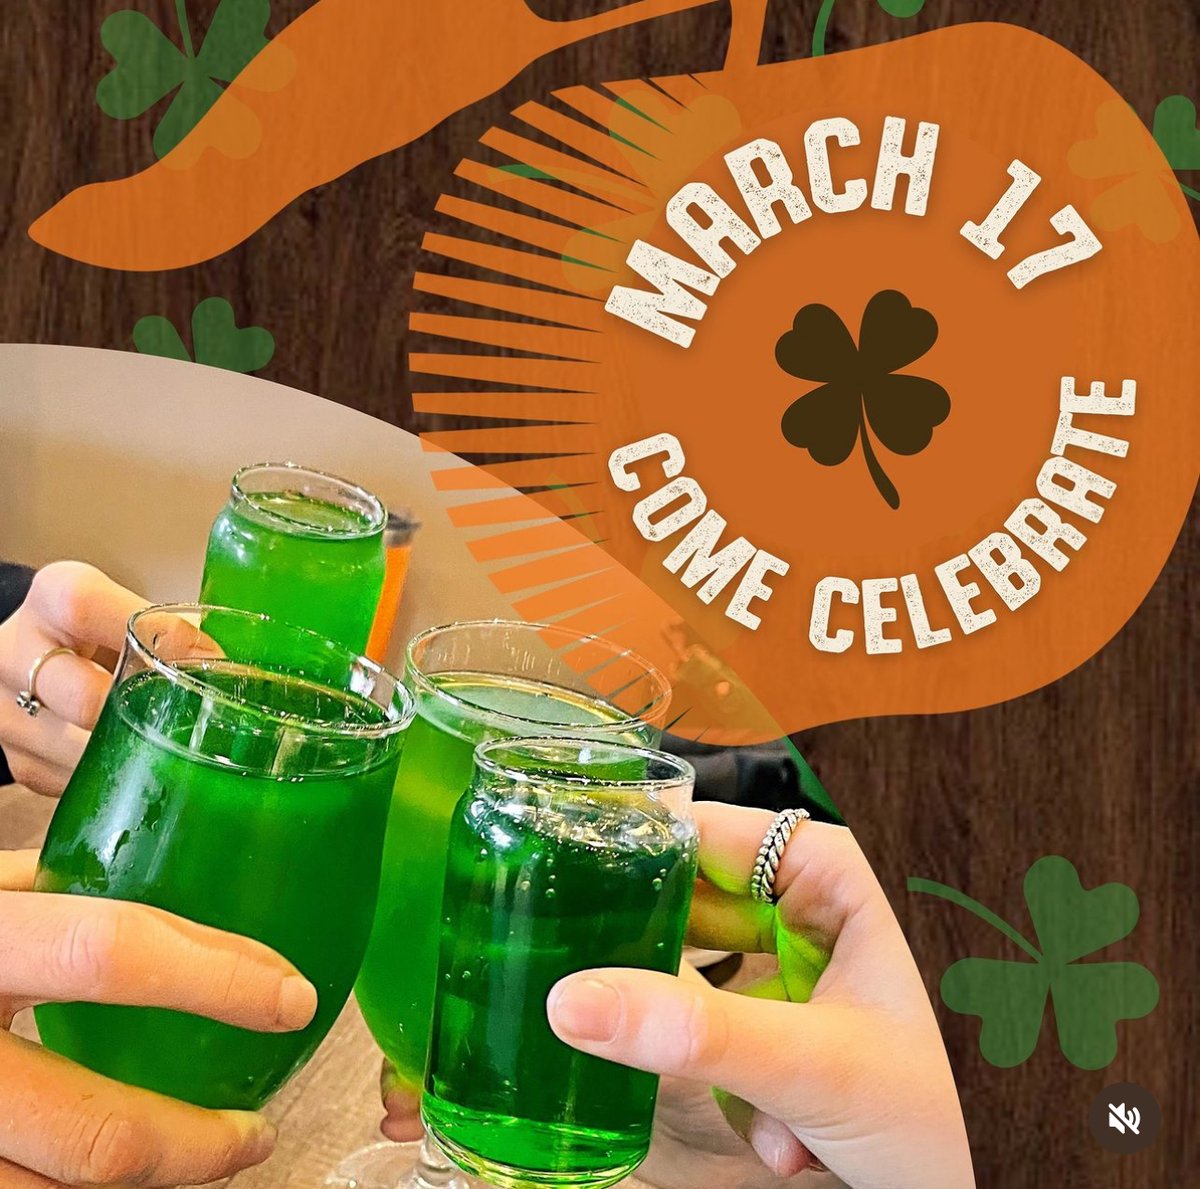 Looking for fun things to do on #StPatricksDay? ☘️ St. Paddy’s Day Cozy Cabins ☘️ 📍: @HarvestBrooklin 💚 Live Music 💚 📍: @SlabtownCider ☘️ St. Patrick’s Day Special Menu ☘️ 📍: The Snug, #Newcastle For more, visit bit.ly/43hrLJz. Enjoy responsibly!